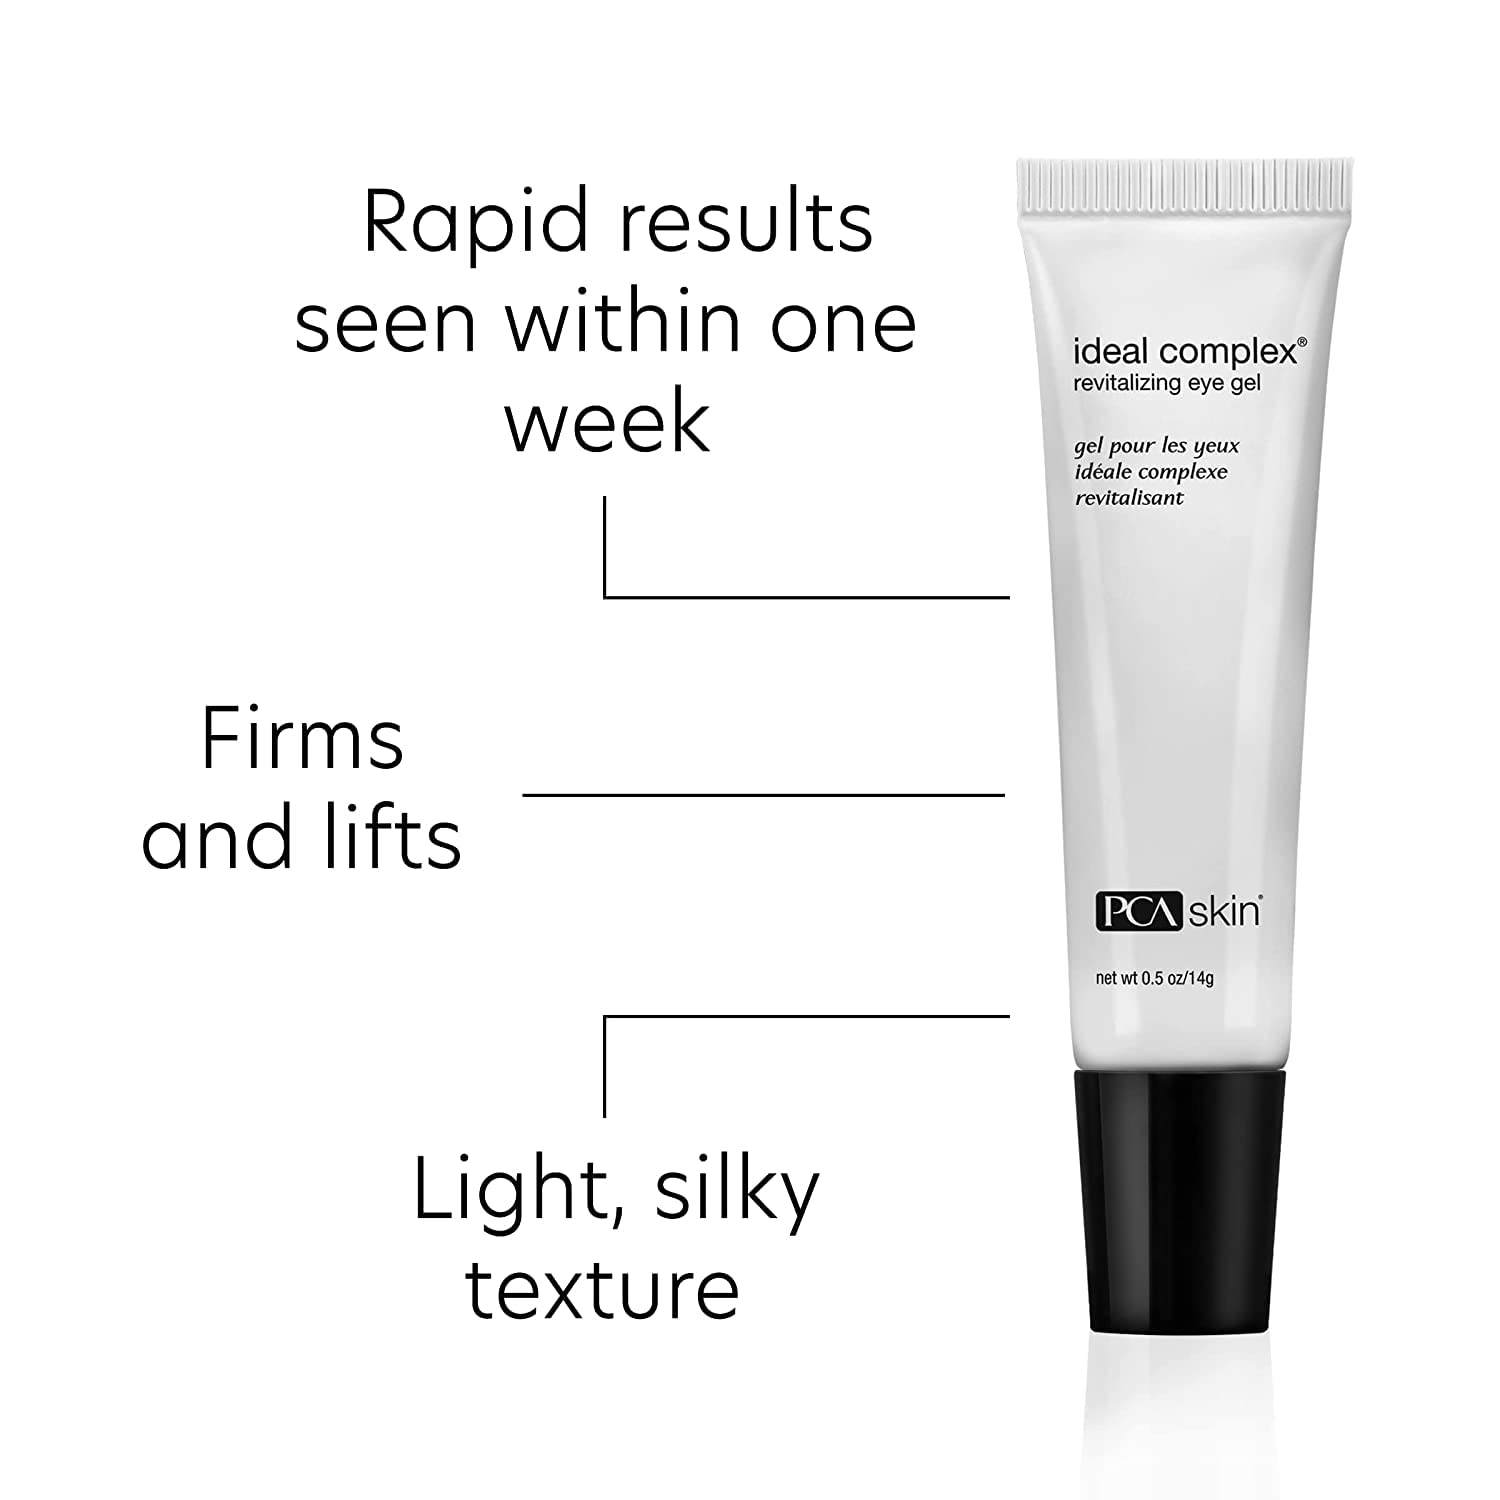 PCA SKIN Ideal Complex Revitalizing Eye Gel, Upper and Under Eye Serum for Dark Circles, Puffiness, Fine Lines, Wrinkles, Discoloration, Sagging Eyelids, Light and Silky Finish, 0.5 oz Tube